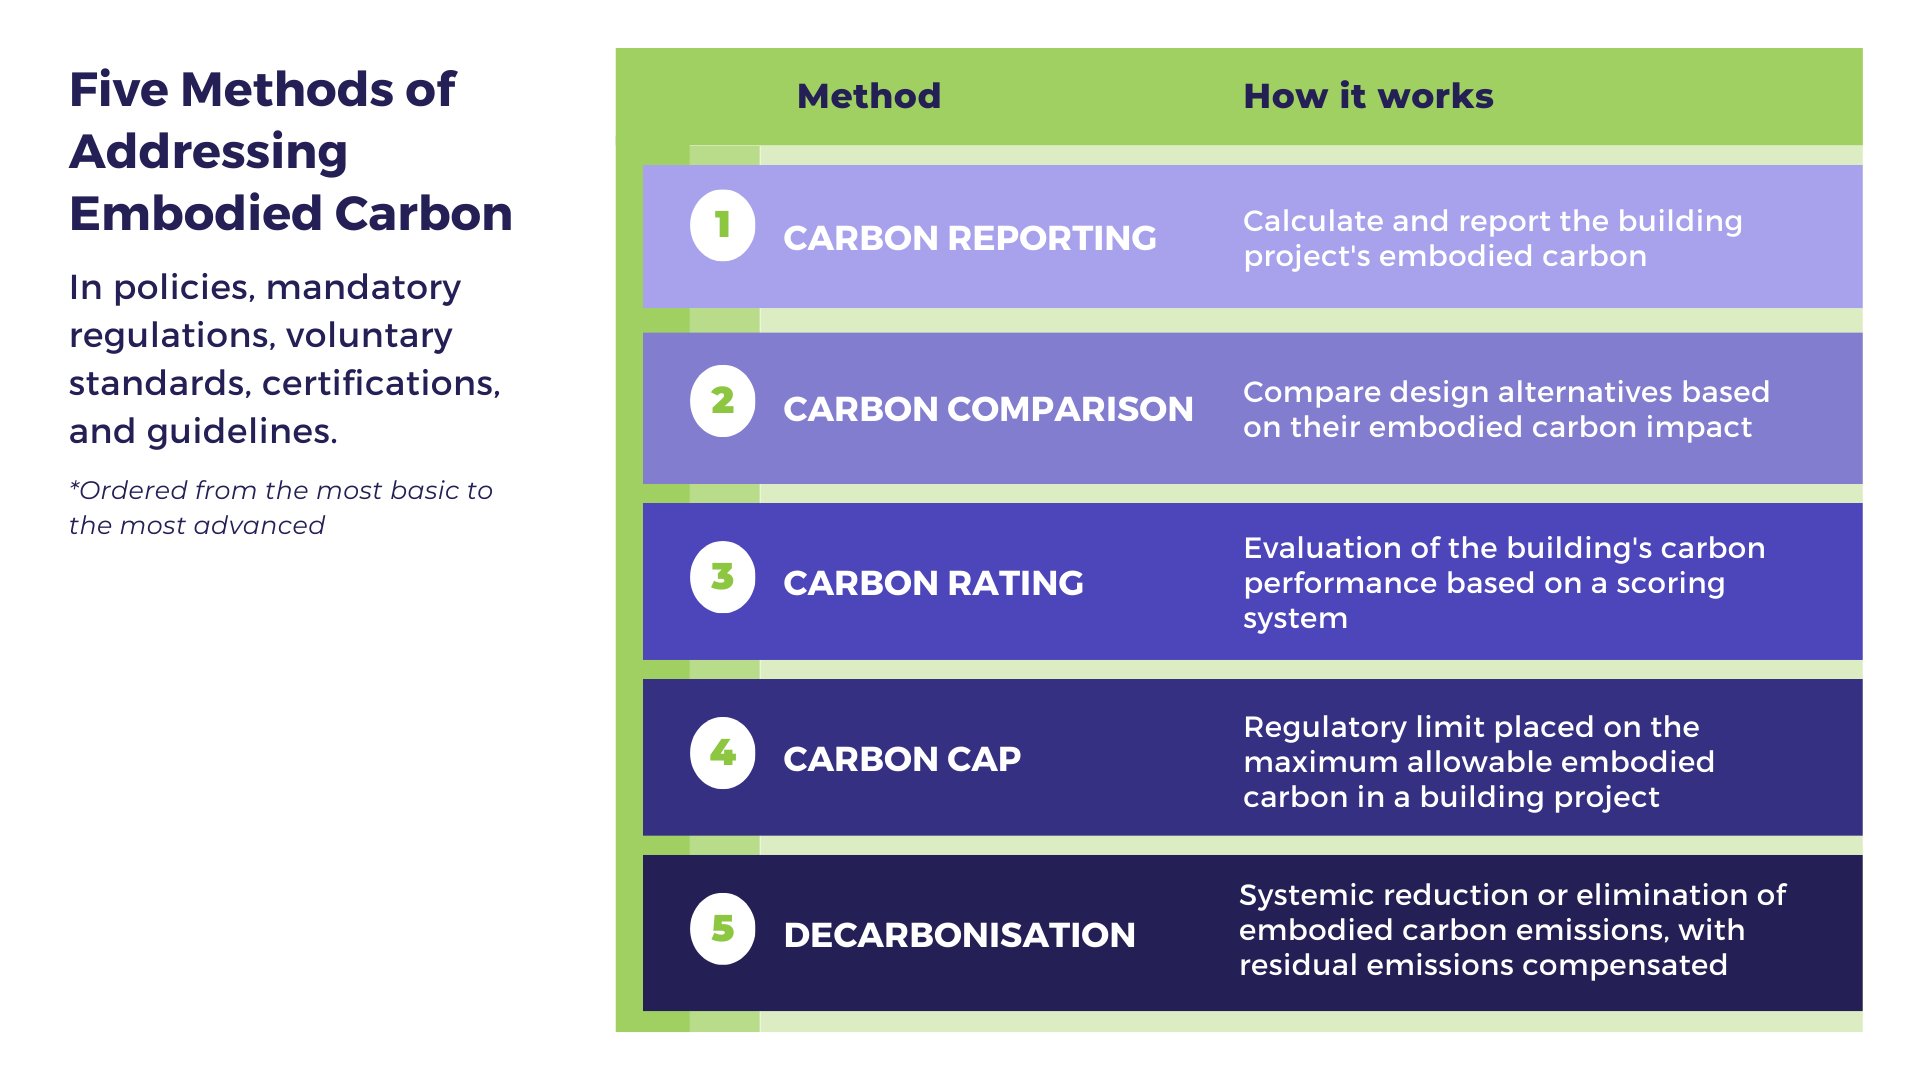 Methods of adressing embodied carbon